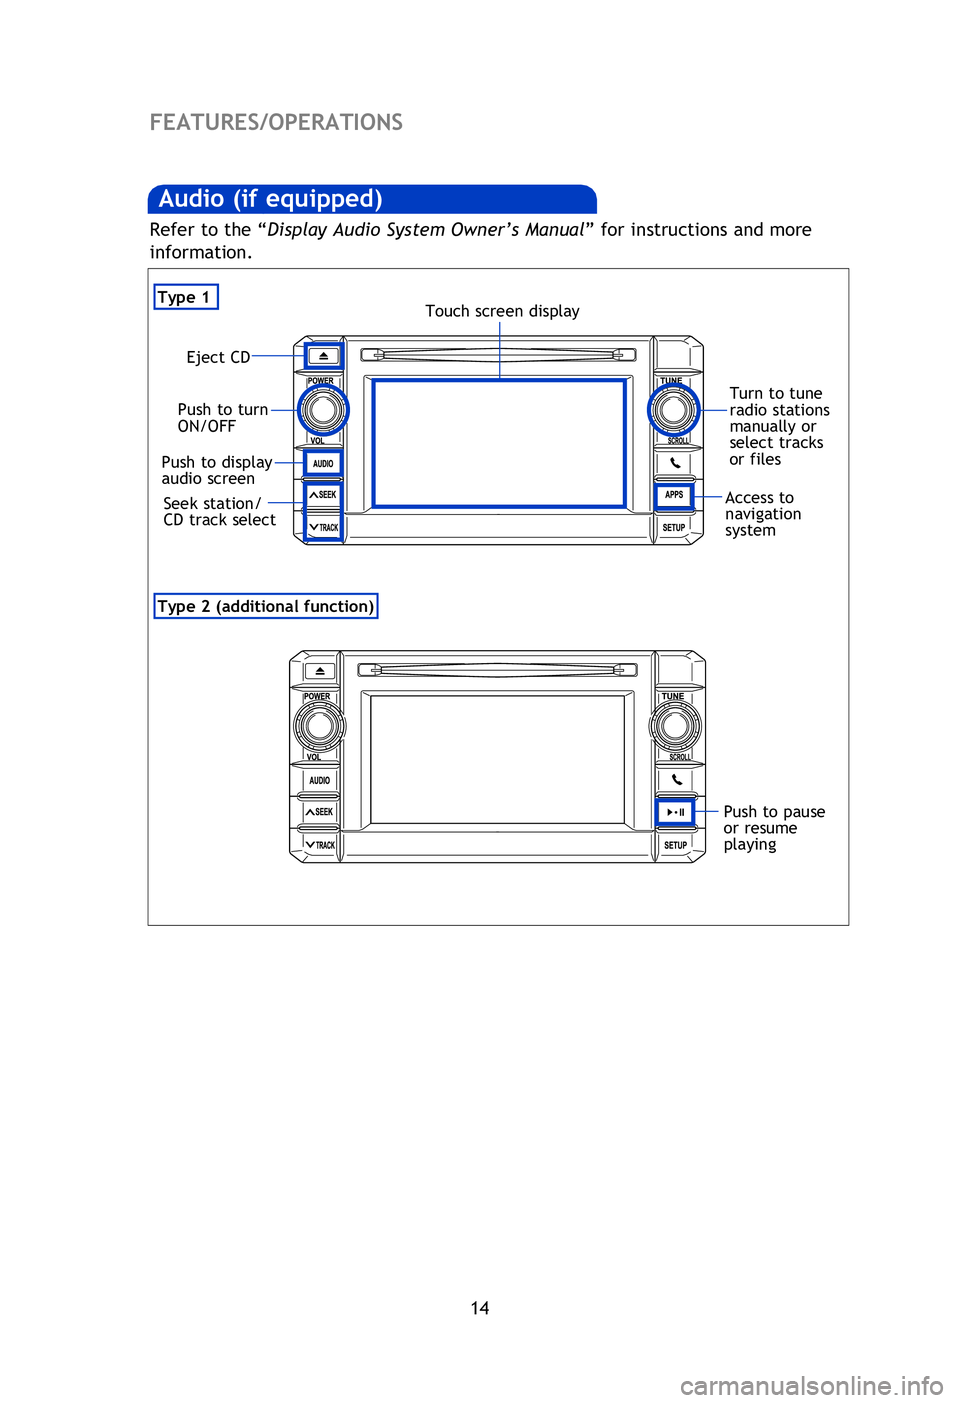 TOYOTA TACOMA 2013  Owners Manual (in English) 14
FEATURES/OPERATIONS
Audio (if equipped)
“       ” 
Use to search within the selected audio medium (radio, CD, iPod®, etc.).
“MODE” 
Push to turn audio ON and select an audio mode. Push and